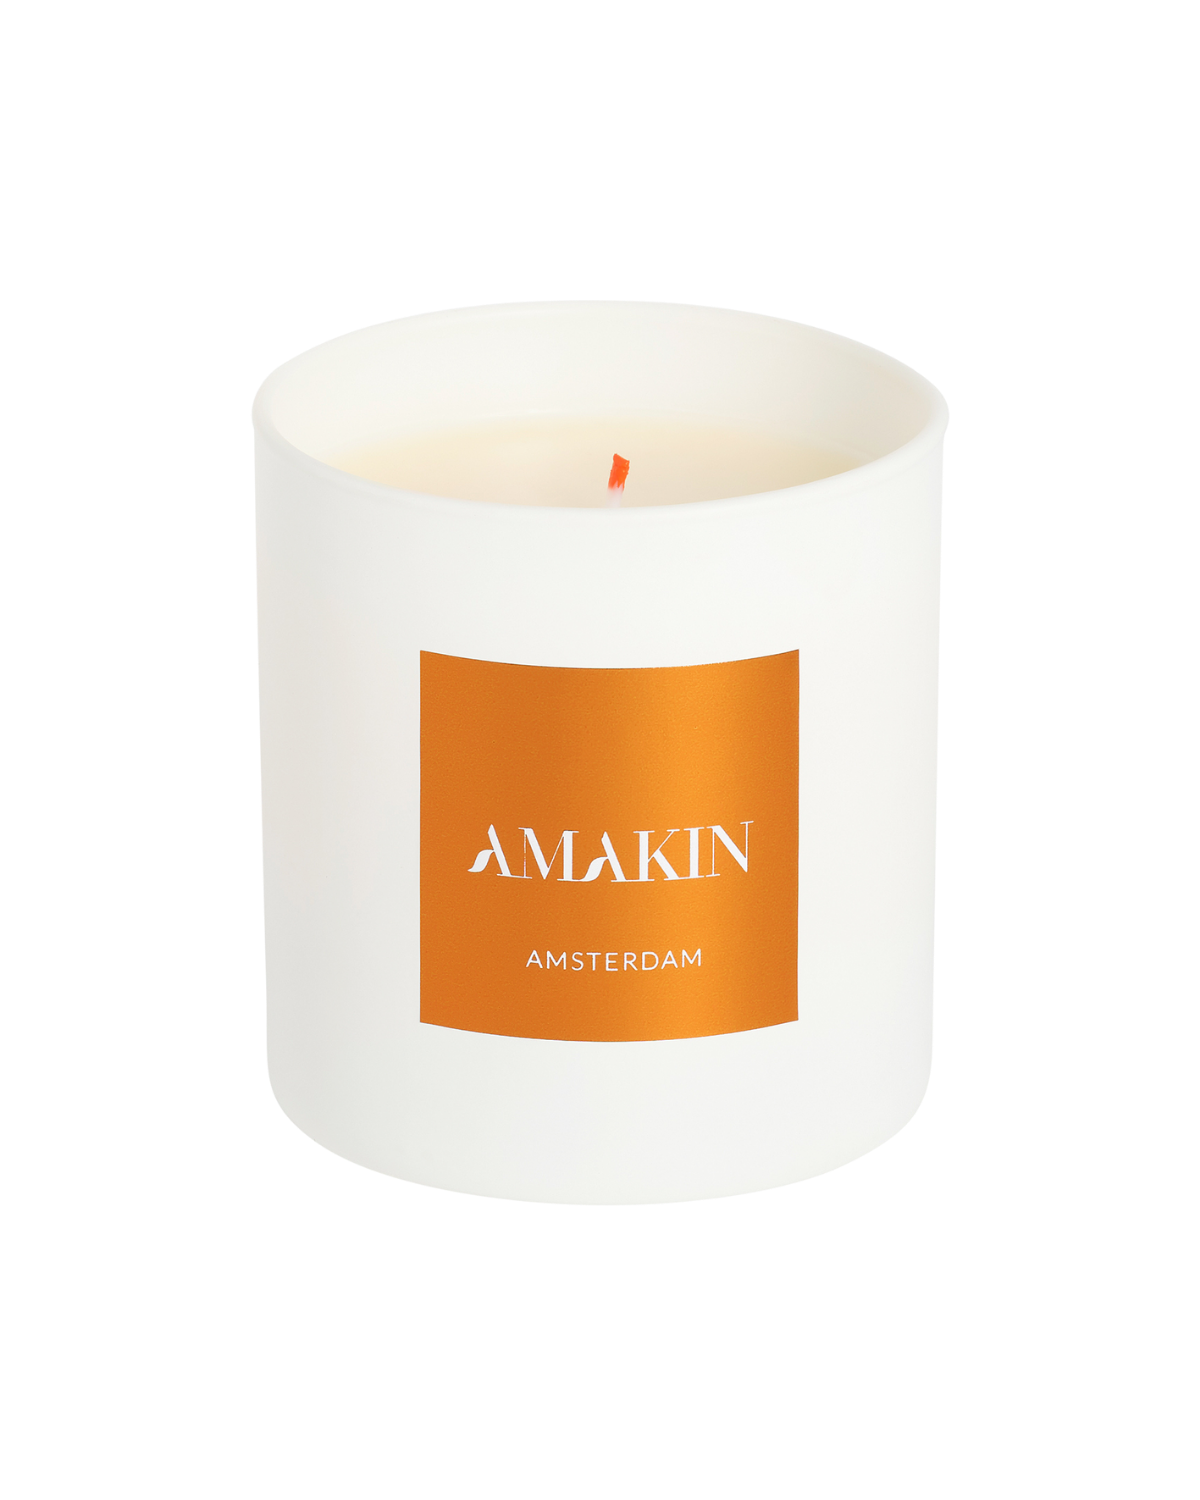 Amsterdam luxury candle perfect gift, fresh scented candle perfect gift